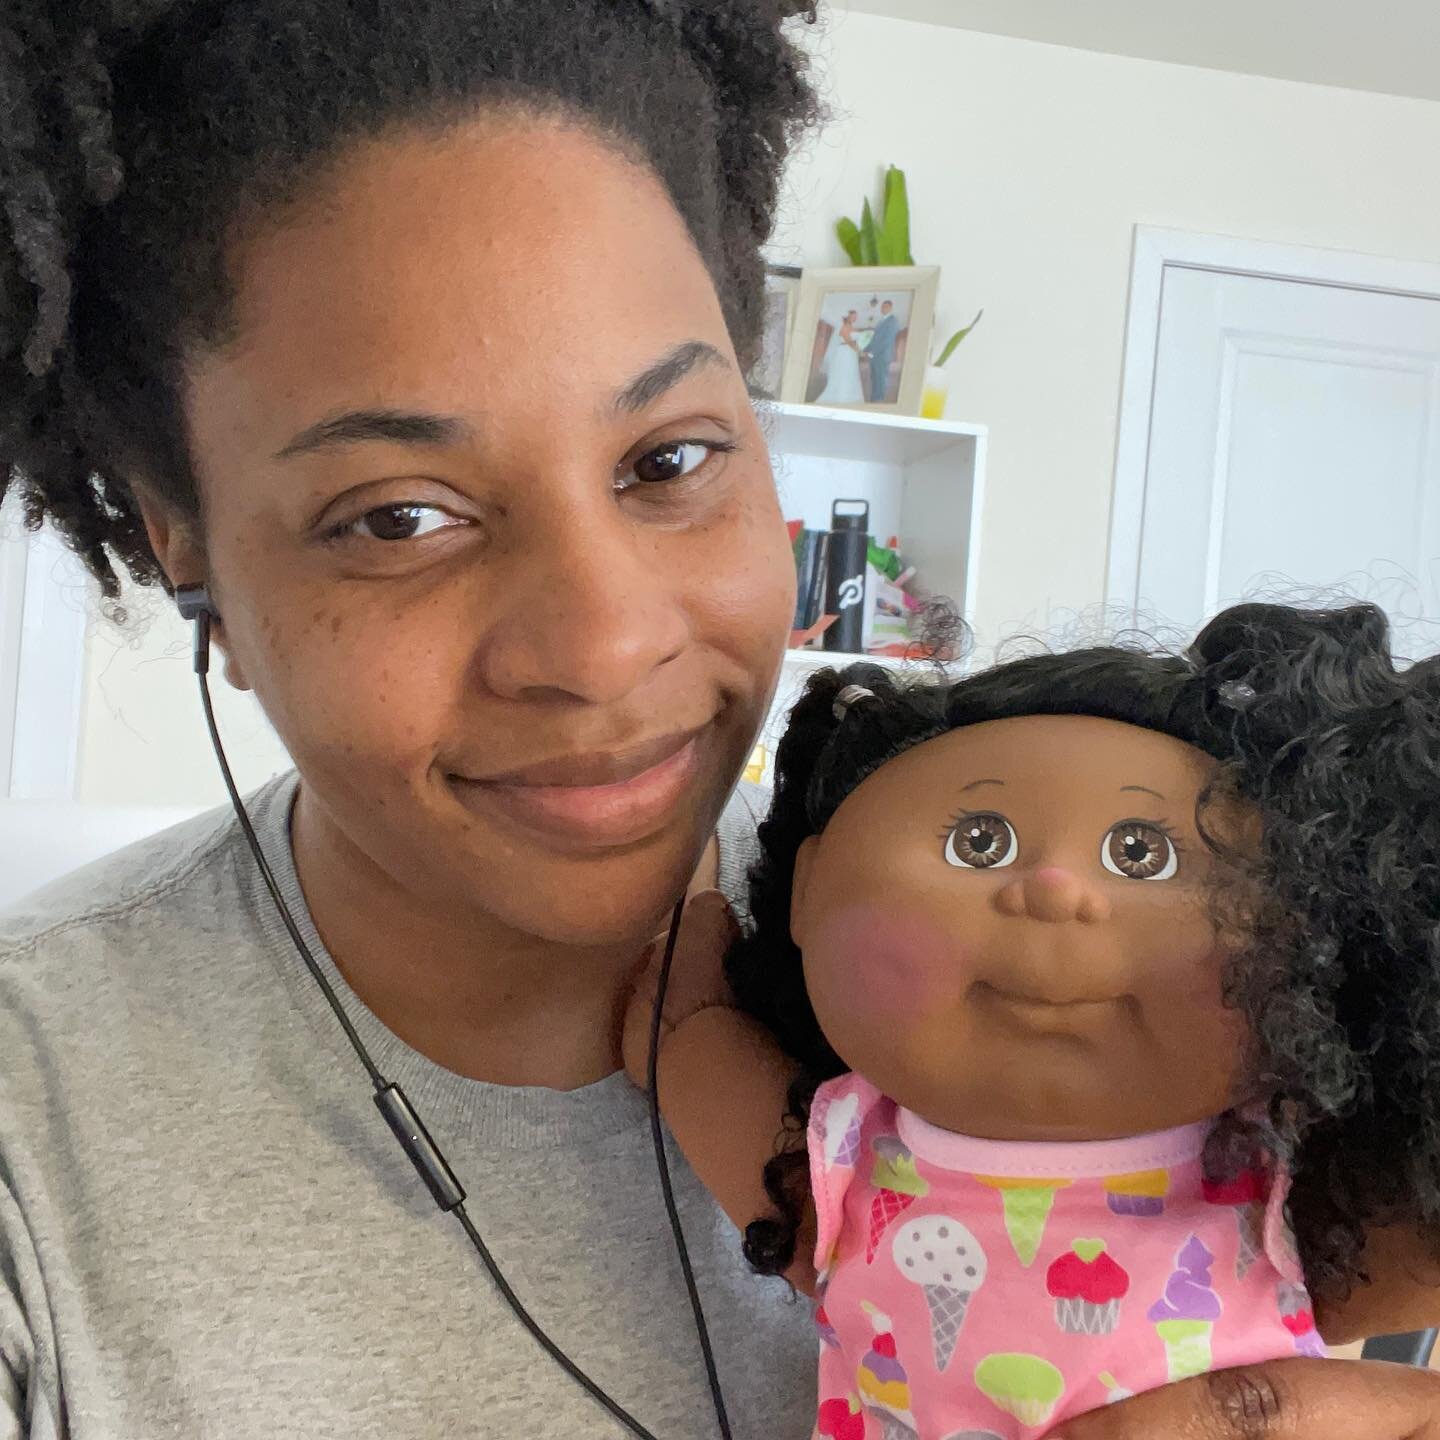 Happy Saturday! I know I preach this a lot, but it bears repeating. Diversify your toys. They are out there. I found a doll in all skin tones and conditions. I have Barbies with vitiligo, afros and braids. This never happened as a kid. 

It&rsquo;s s